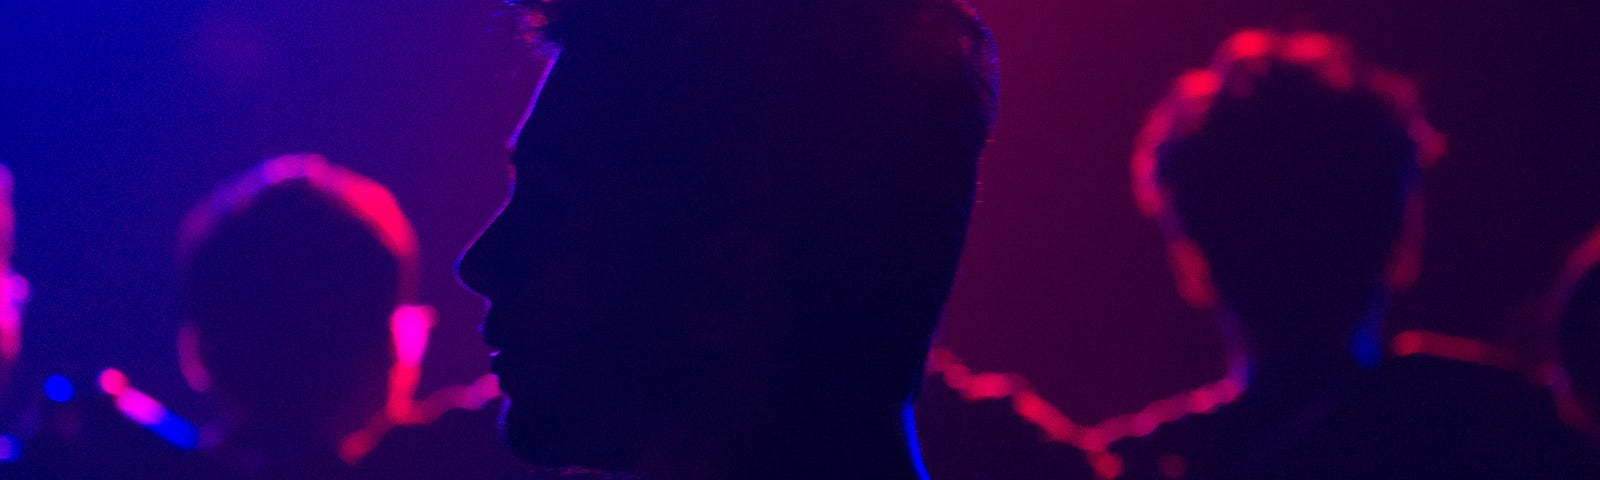 Young guy in the shadows of a nightclub